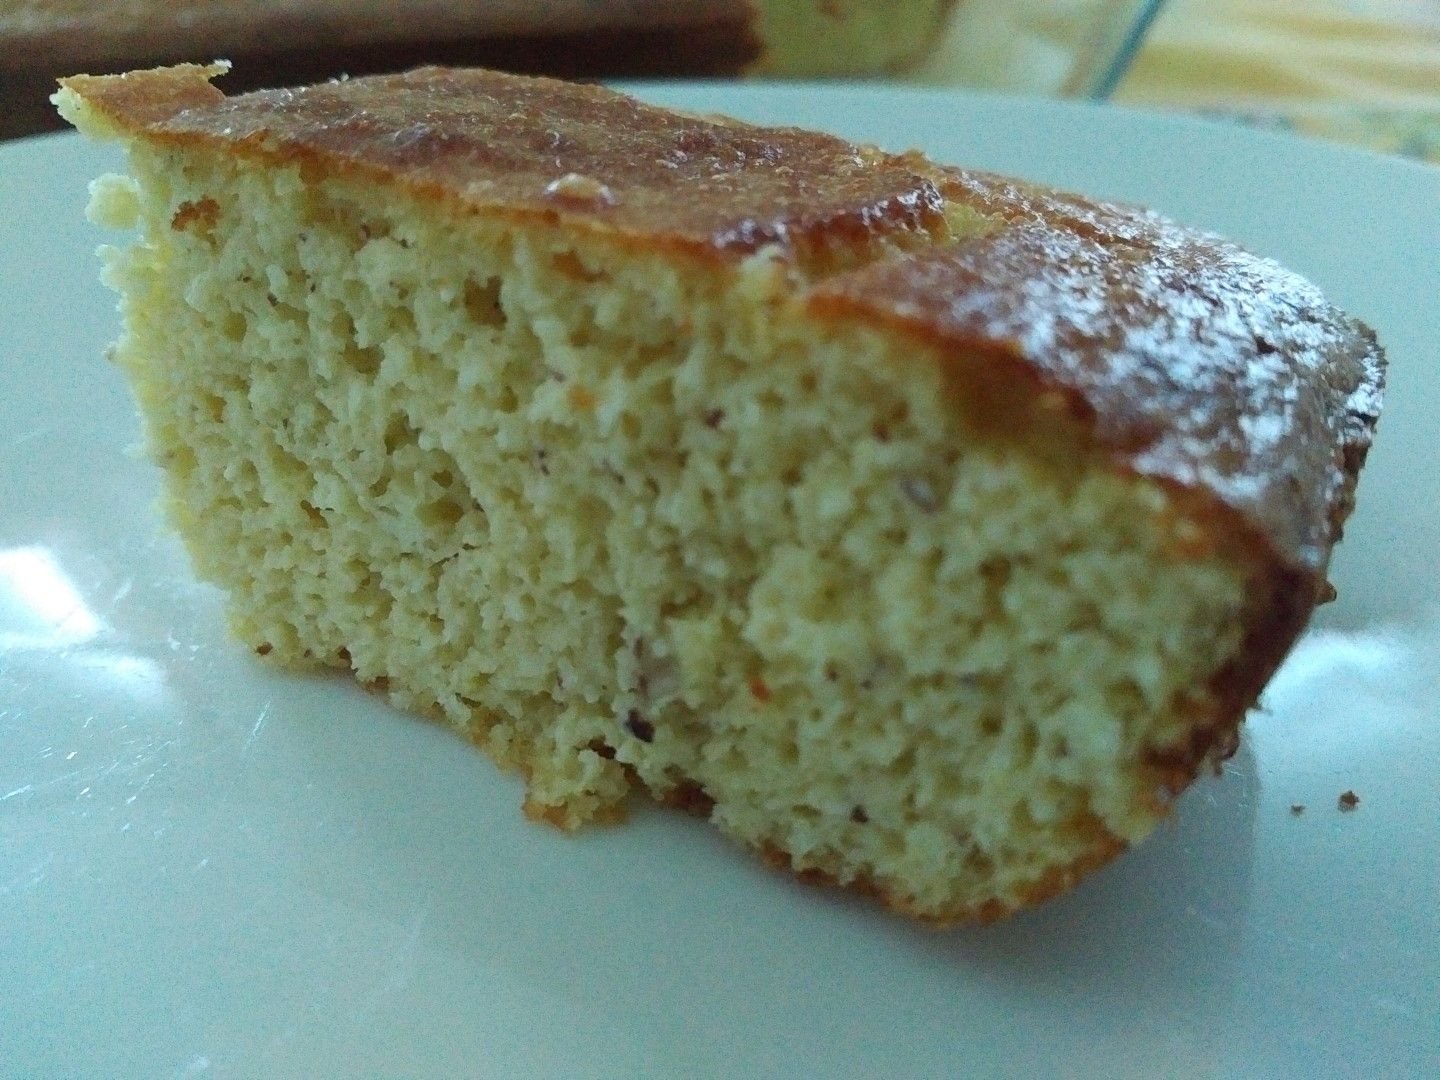 You can have your cake and eat it too! - Almond Cake Recipe (Sugar free!)